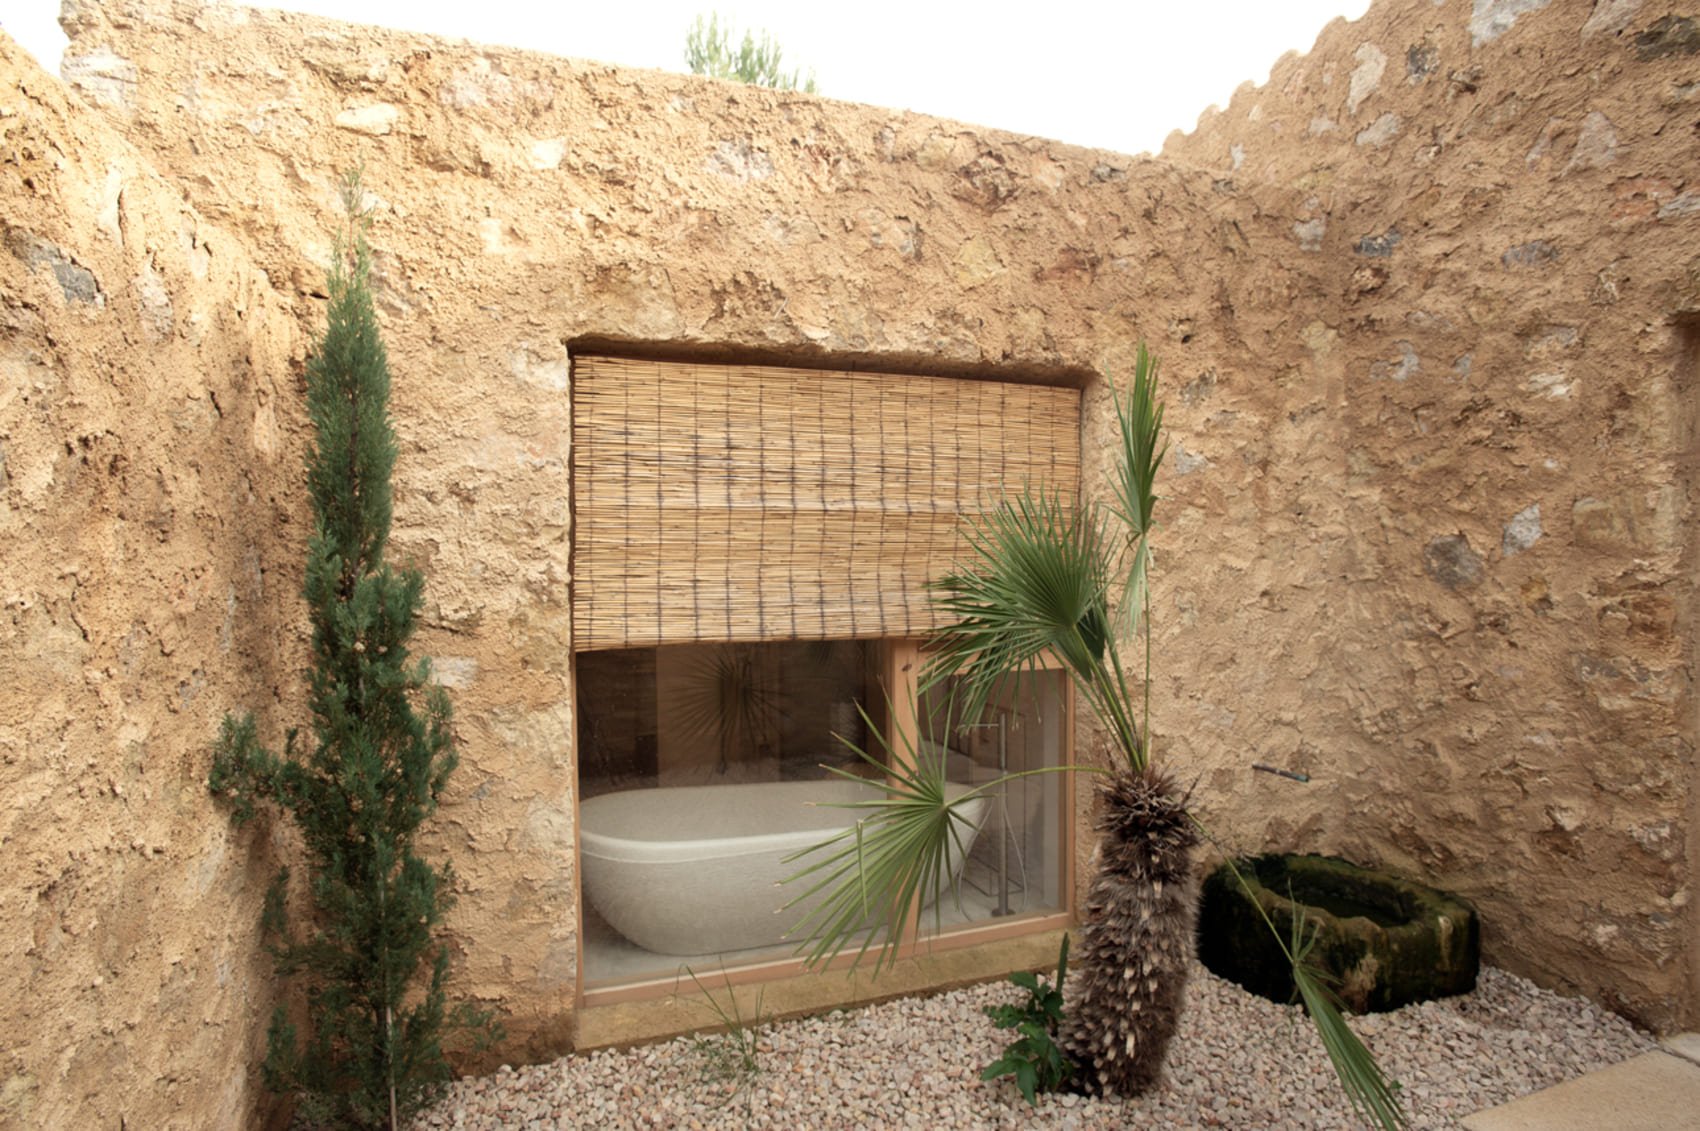 Boutique hotel with spa and restaurant 5* Mallorca Spain - Es Raco d'Arta - exterior